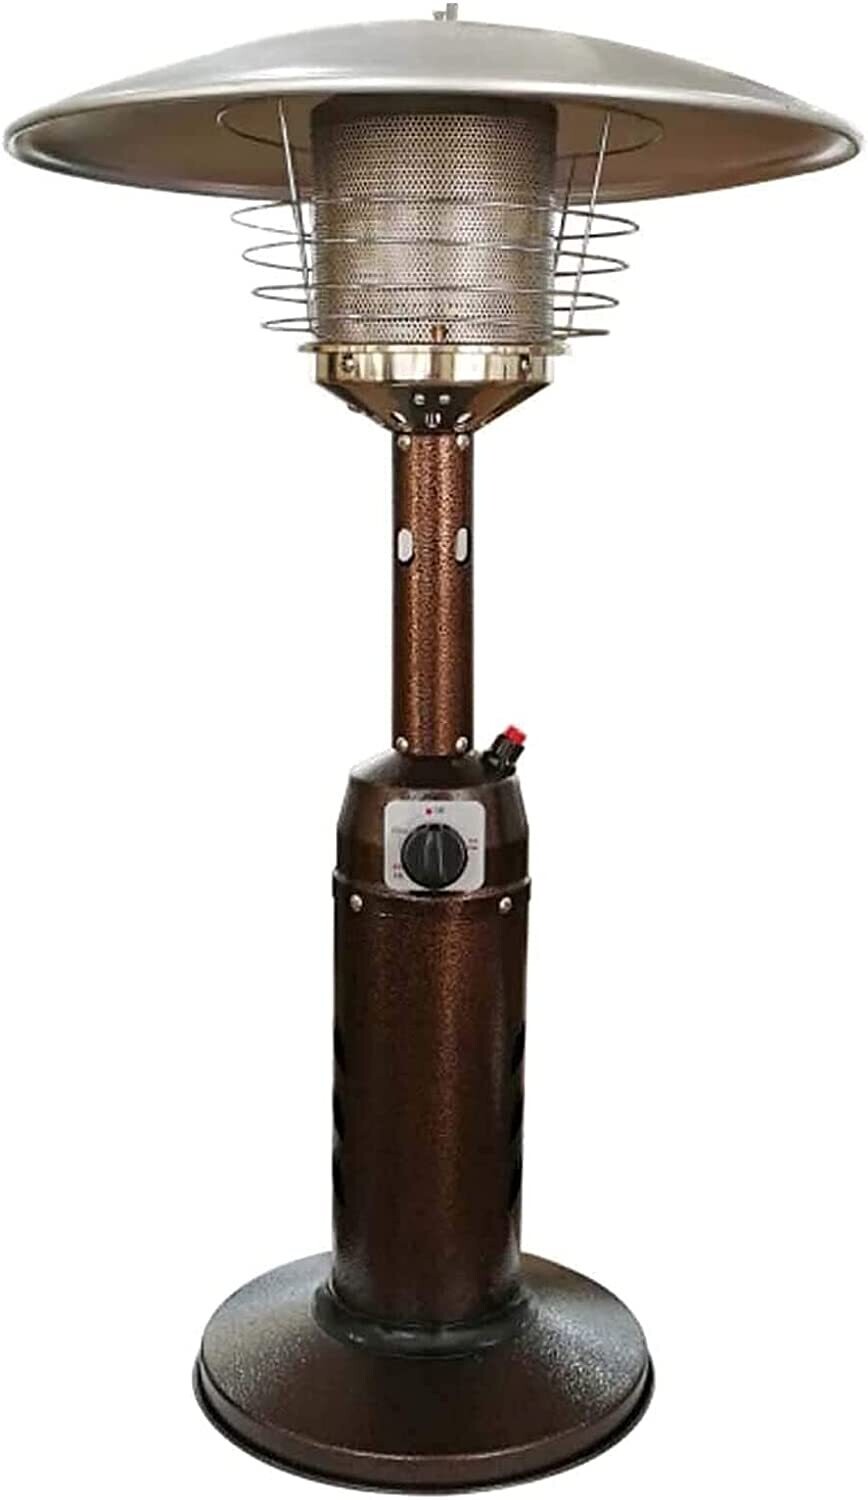 Tabletop Stainless Steel Patio Heater with Hose for Bottled Gas